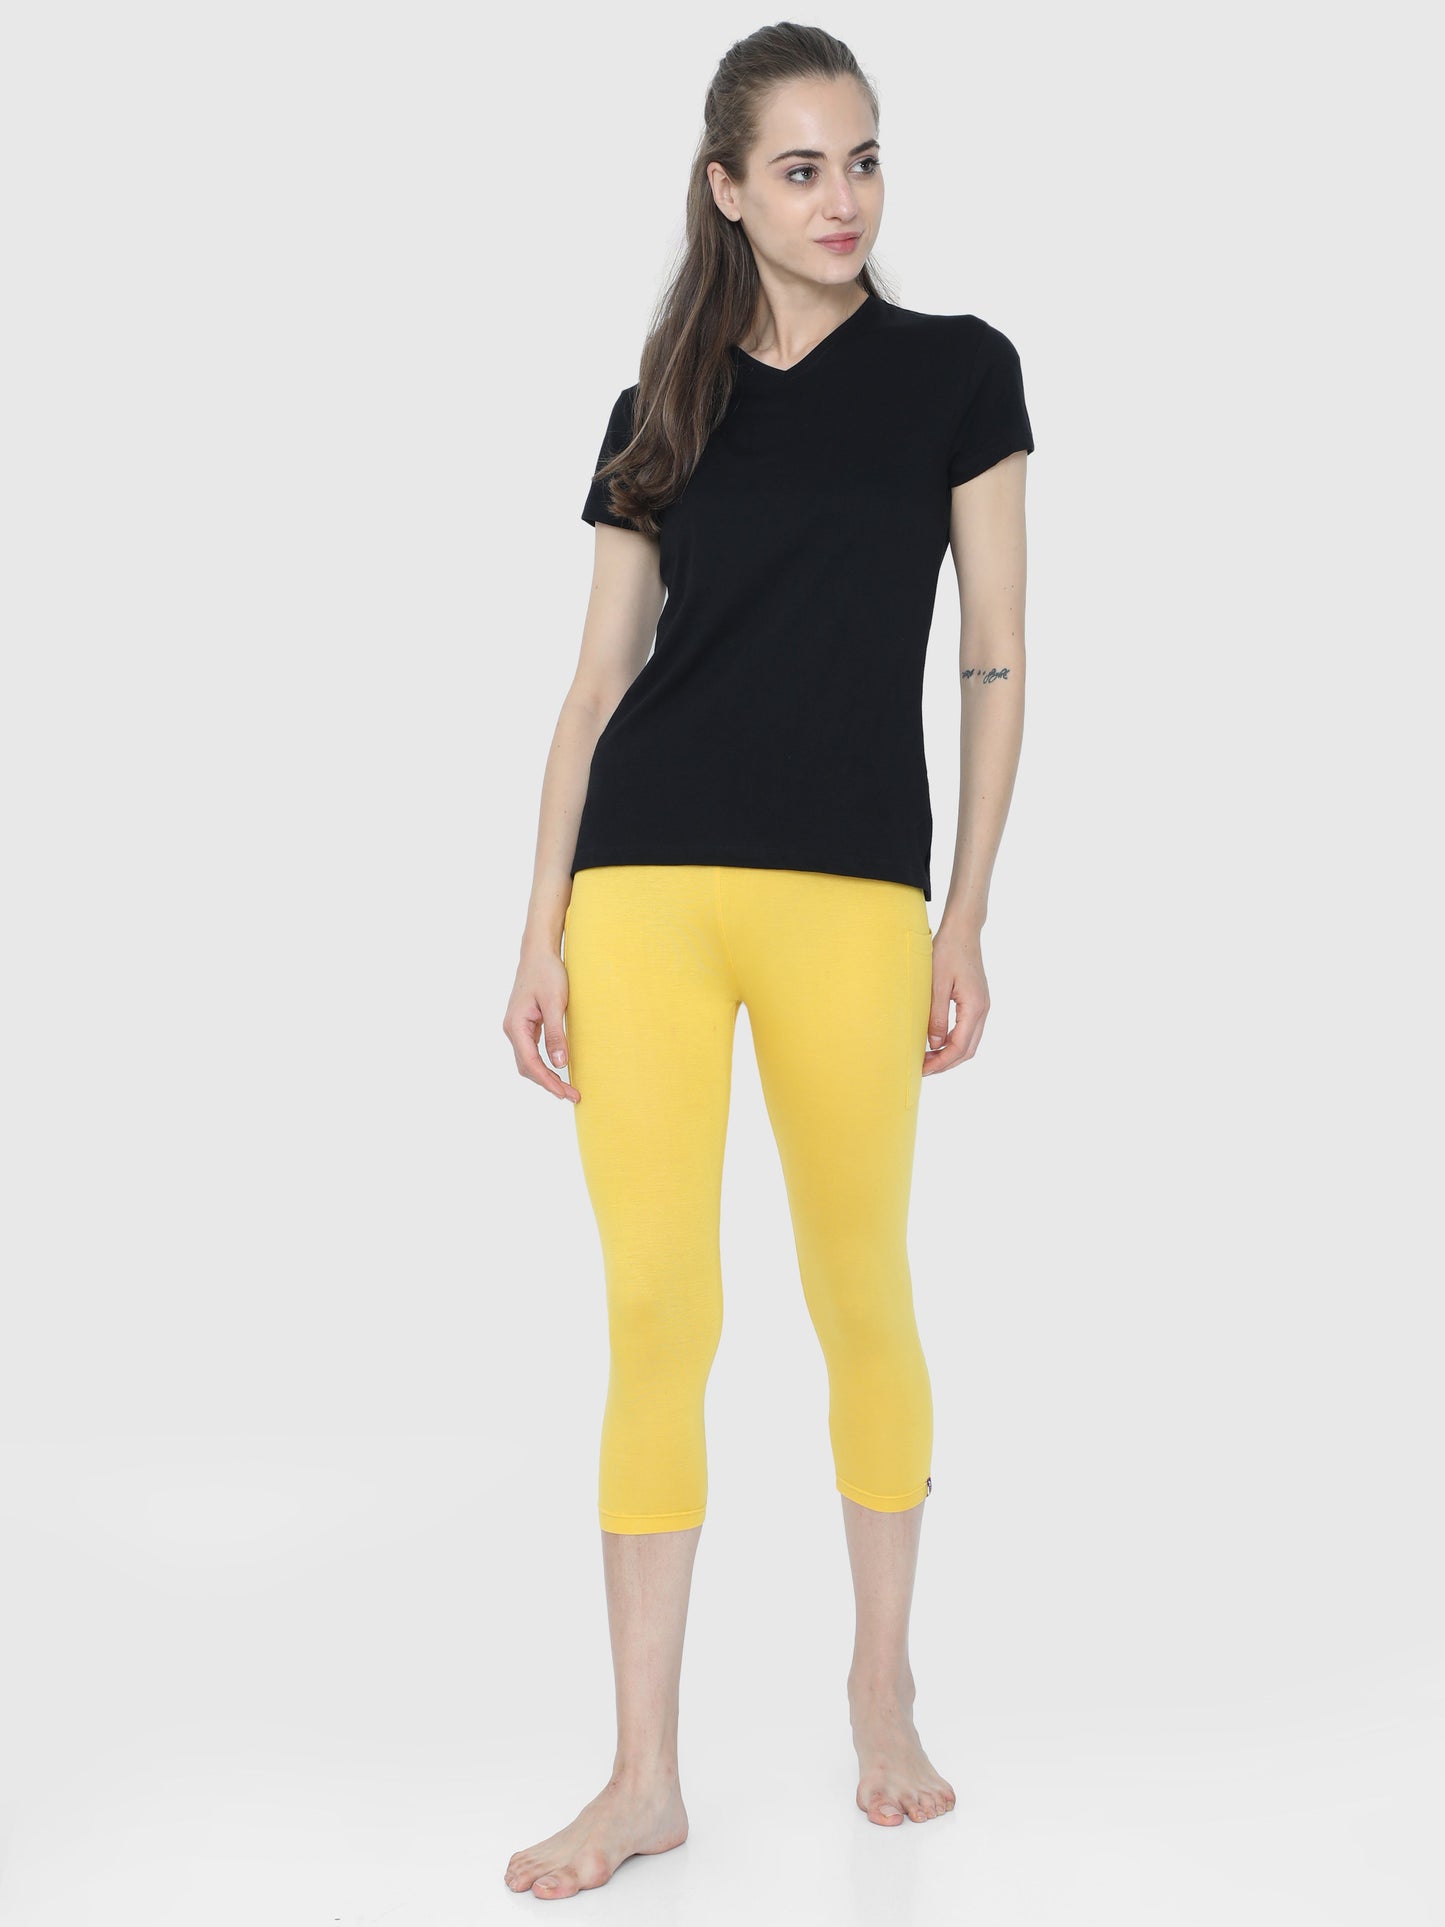 Butter Yellow Solid Leggings Knee